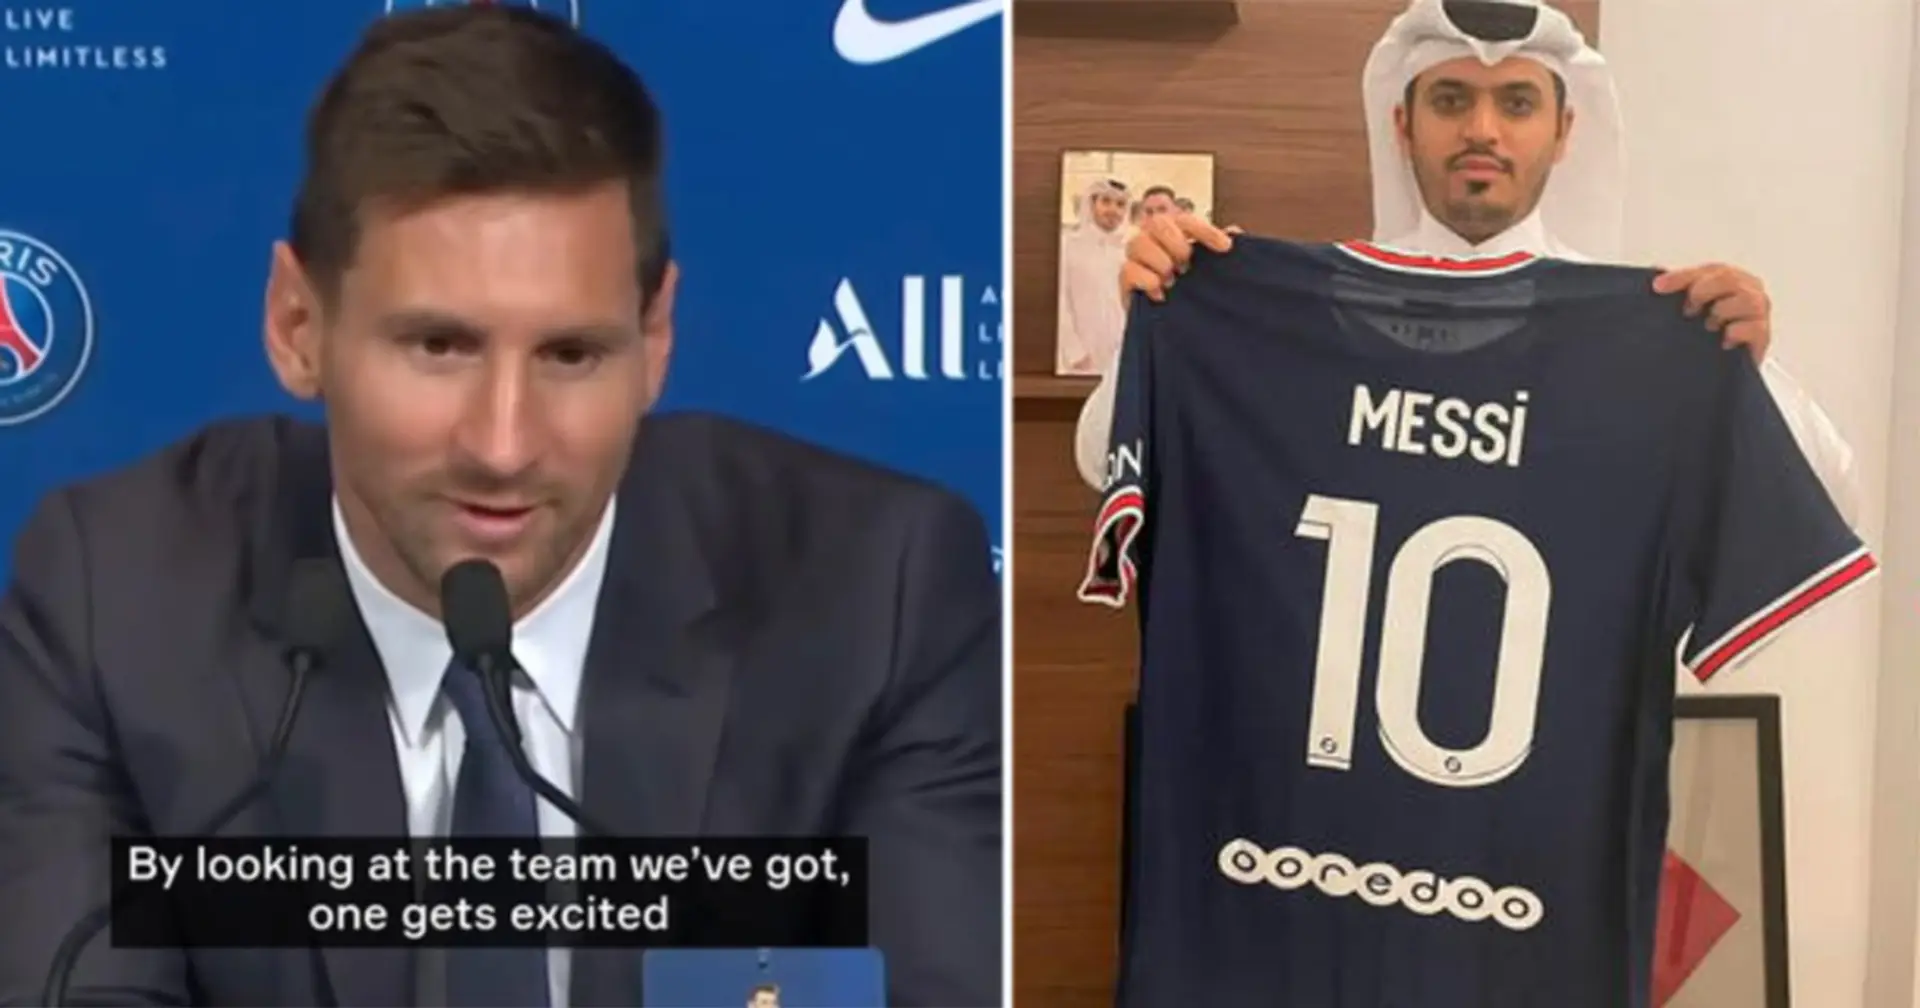 Messi set to wear no. 10 in next PSG game: here's why